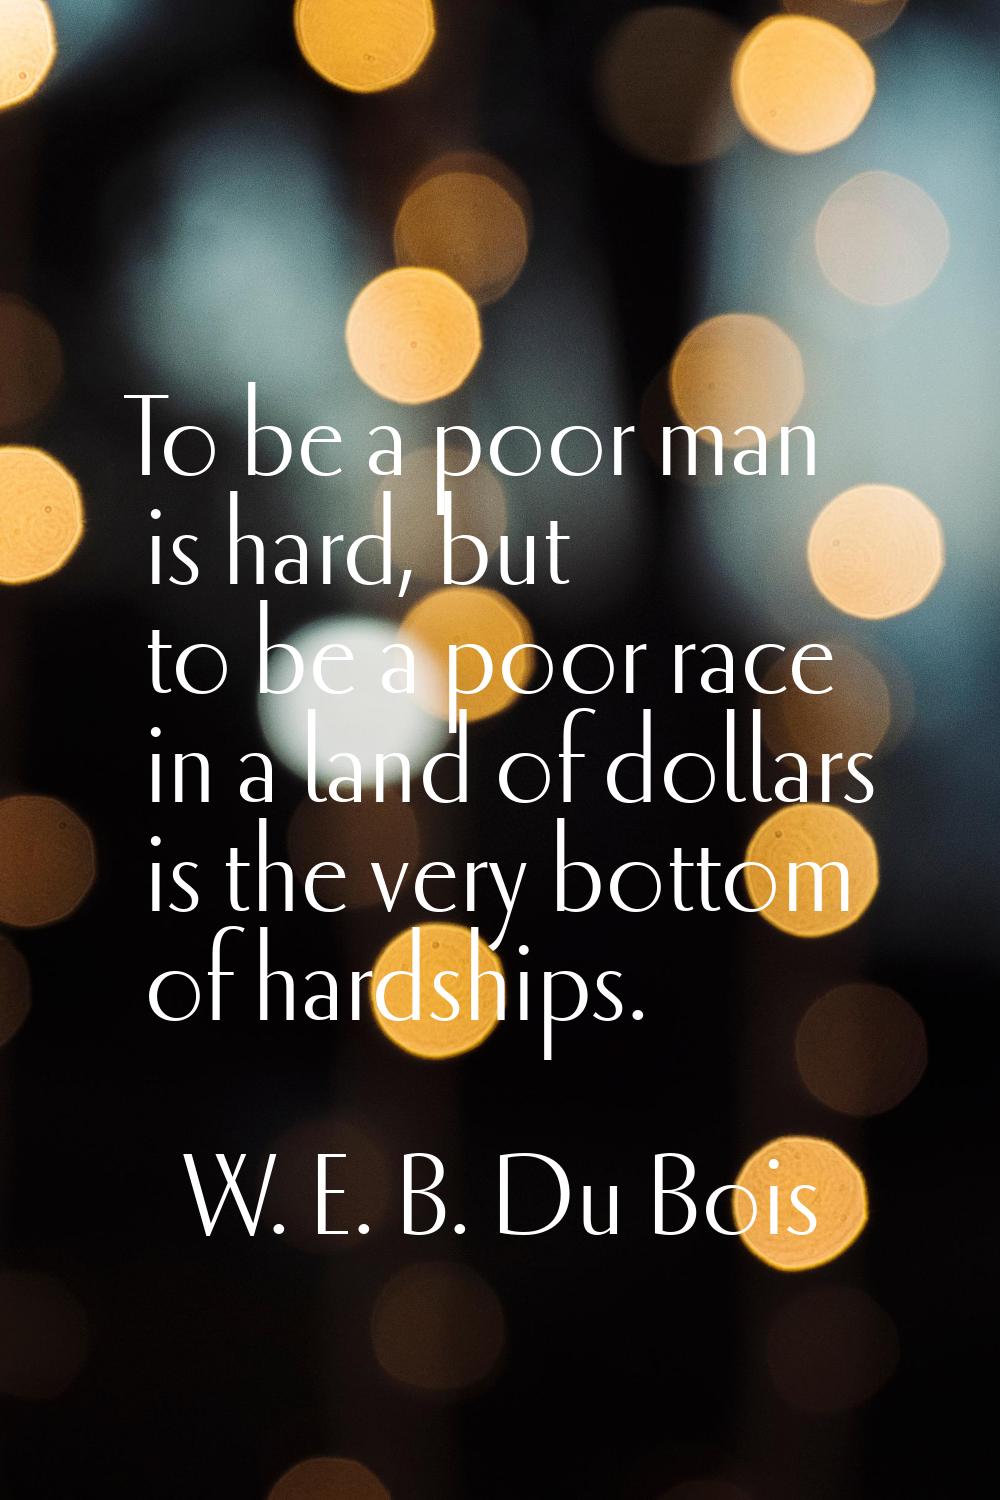 To be a poor man is hard, but to be a poor race in a land of dollars is the very bottom of hardship